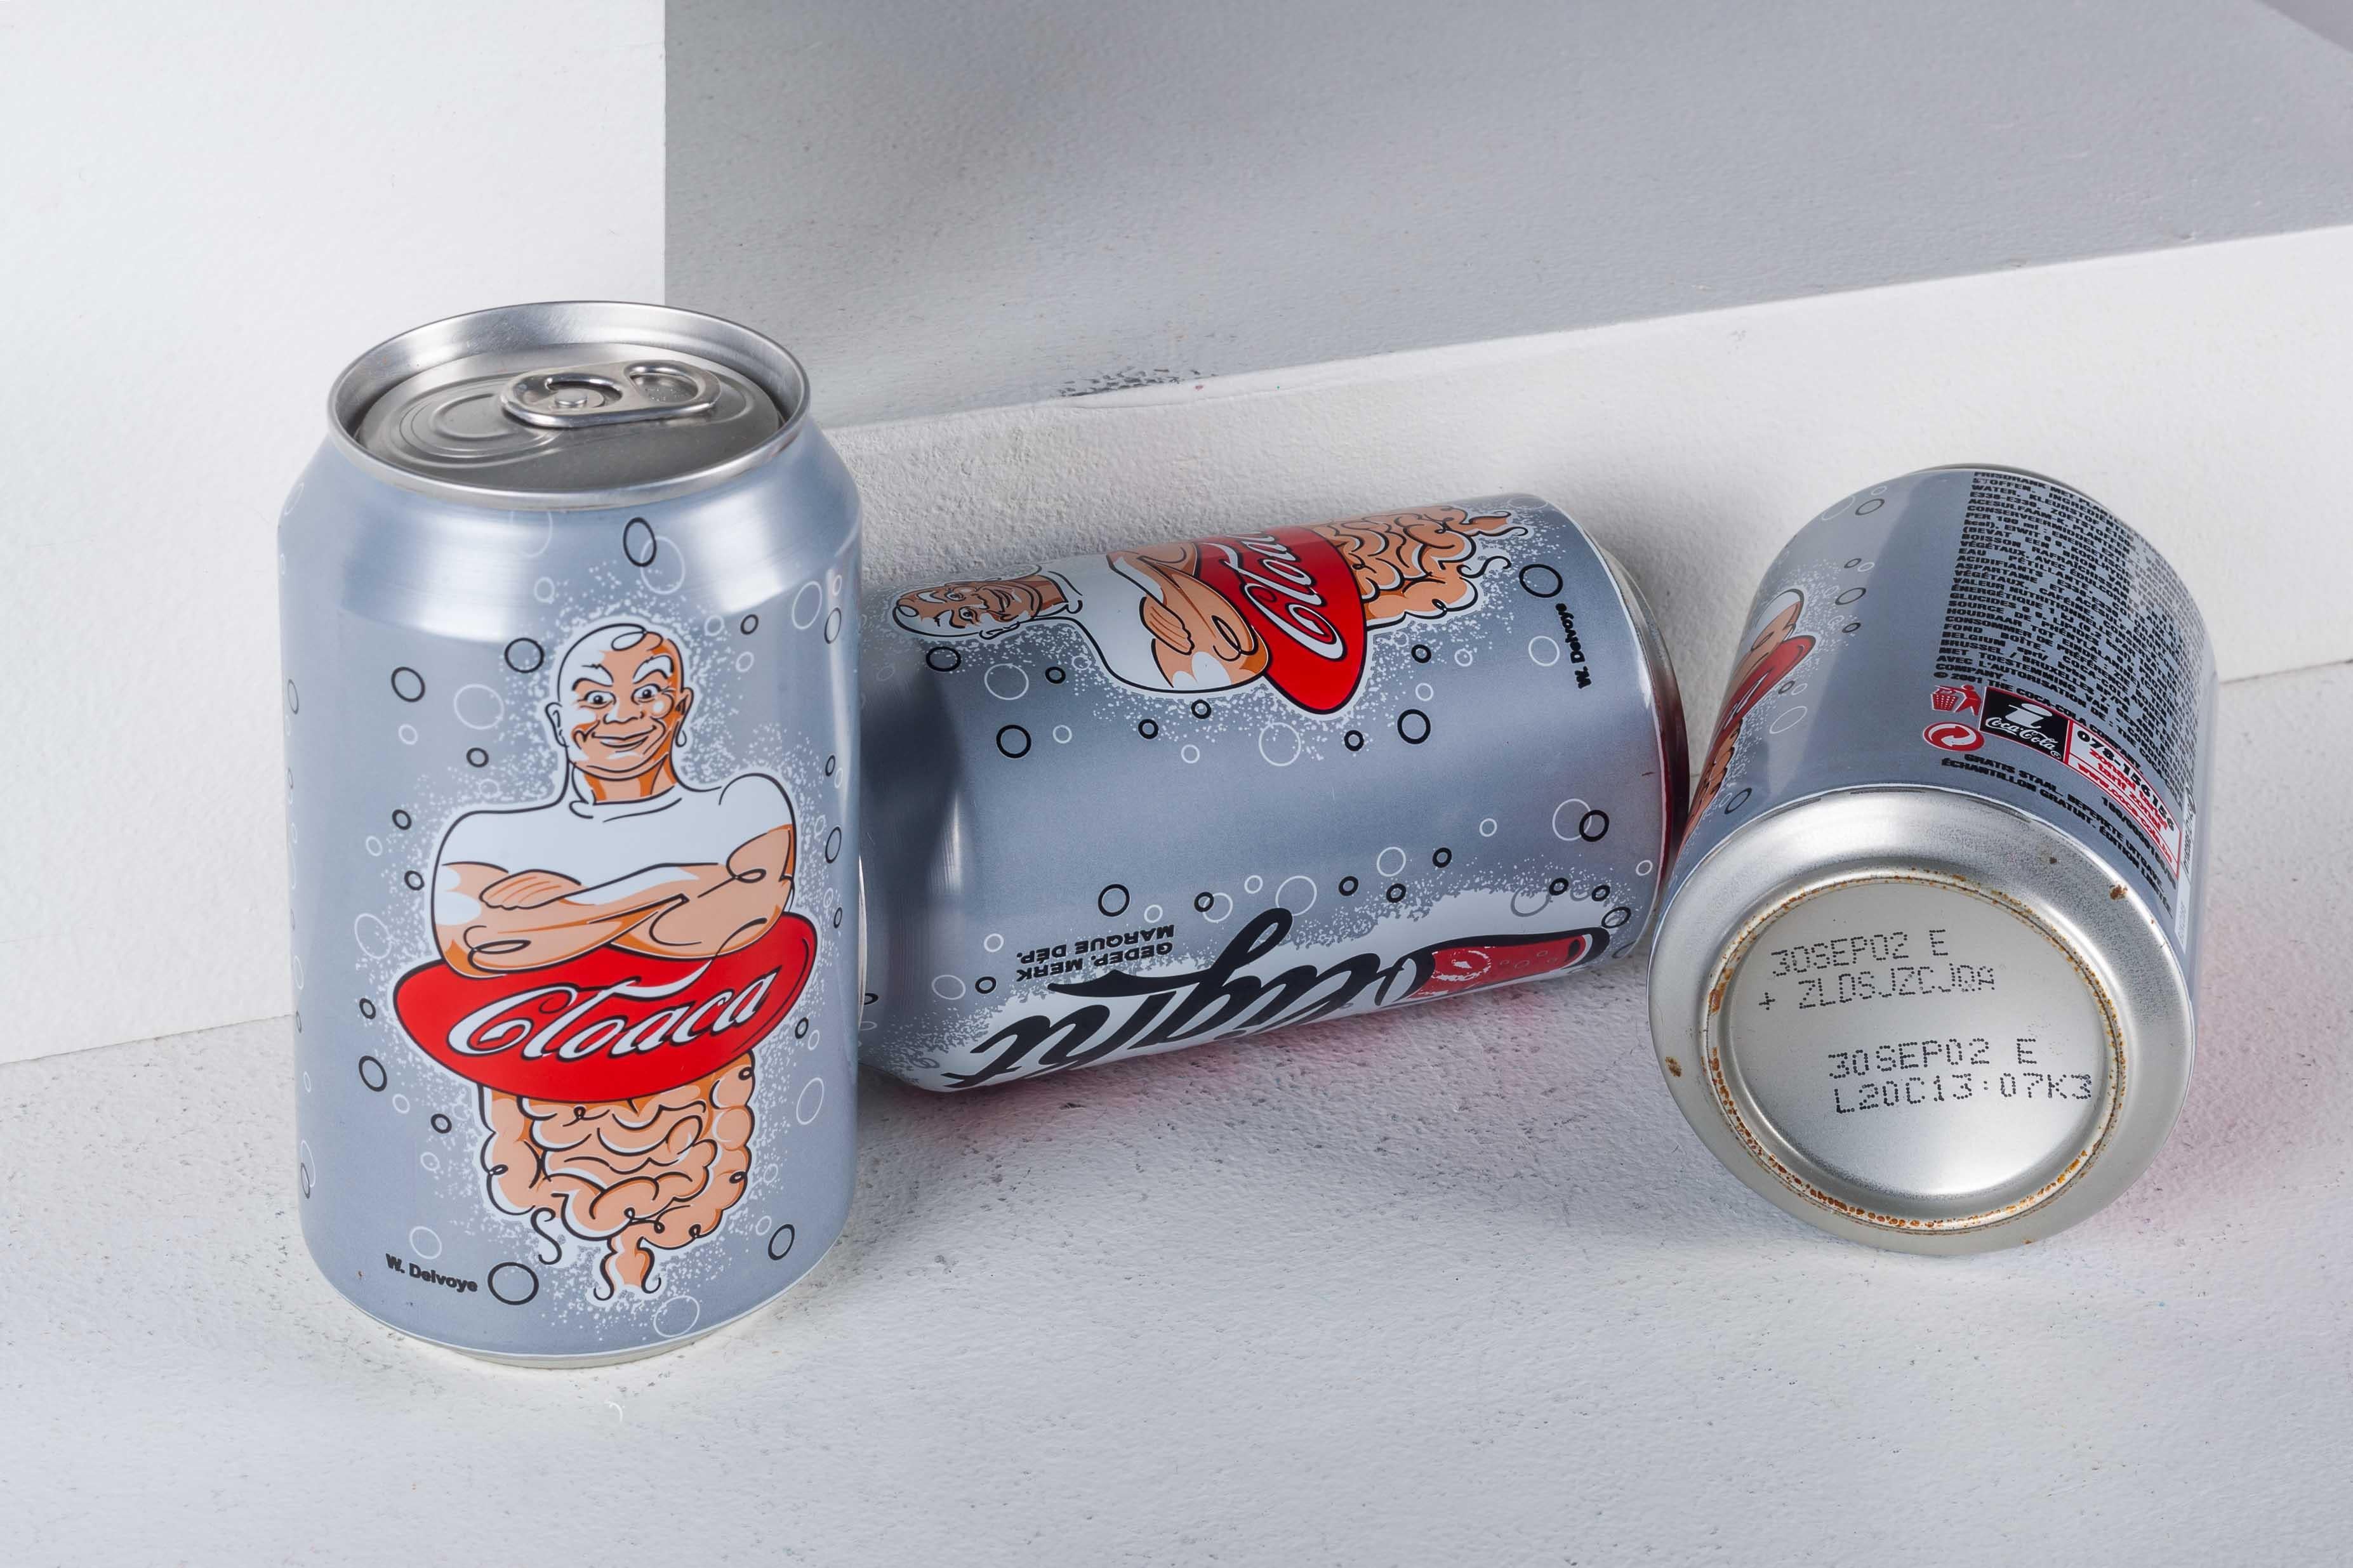 Post-Modern Wim Delvoye Cloaca Coke Light Cans, 2002 '3 Available, Price Per Can' For Sale